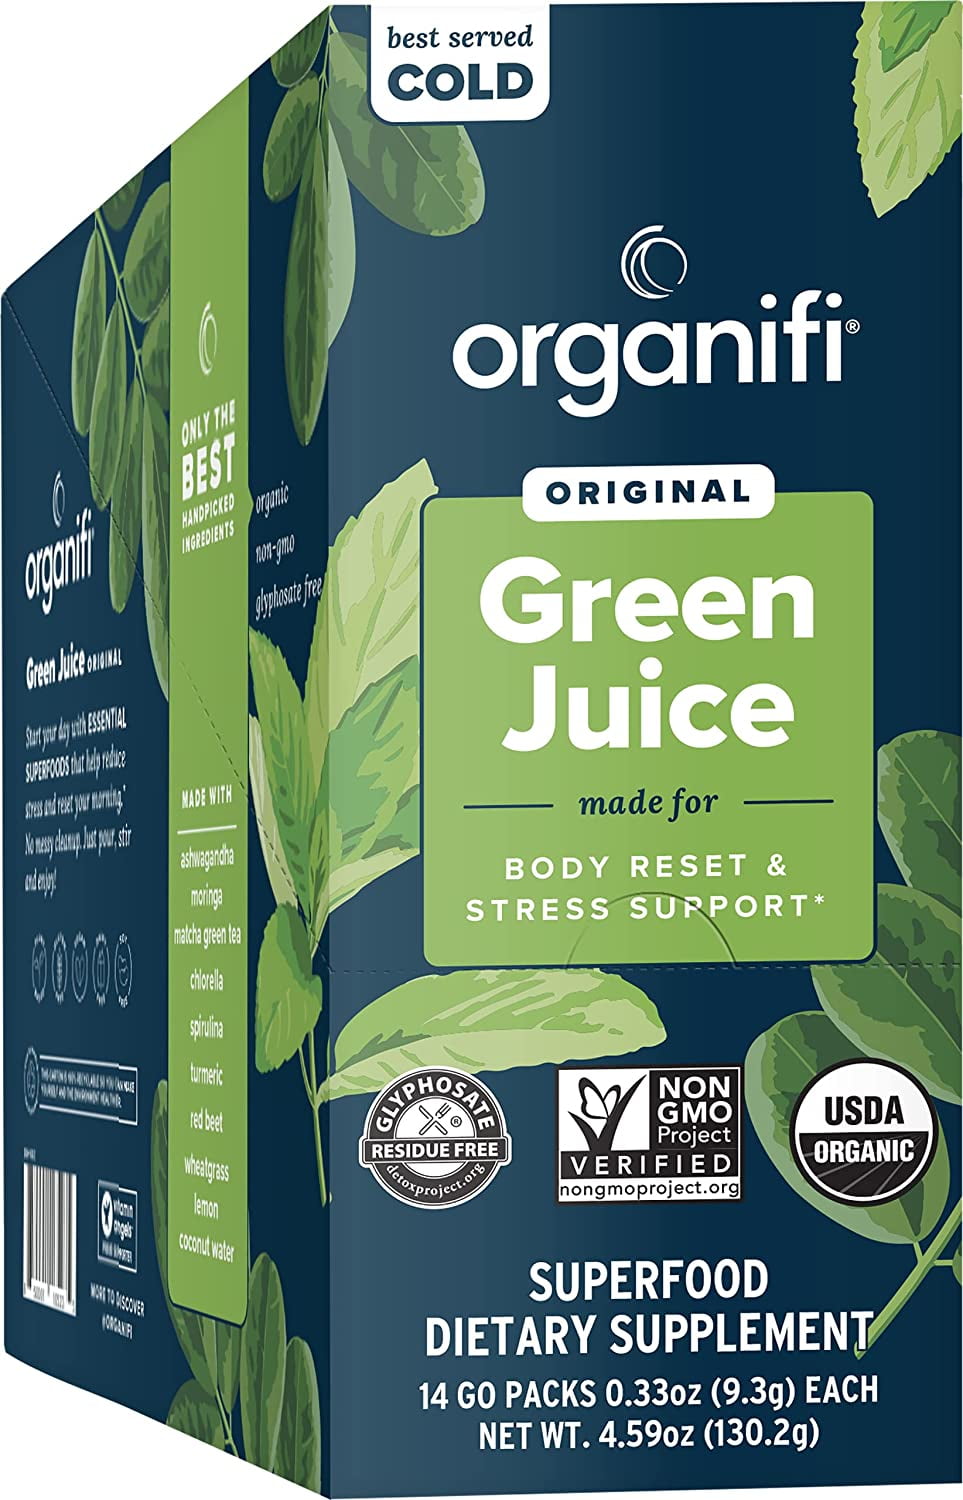 3 Simple Techniques For Organifi Green Juice Review - Real Superfood Supplement?